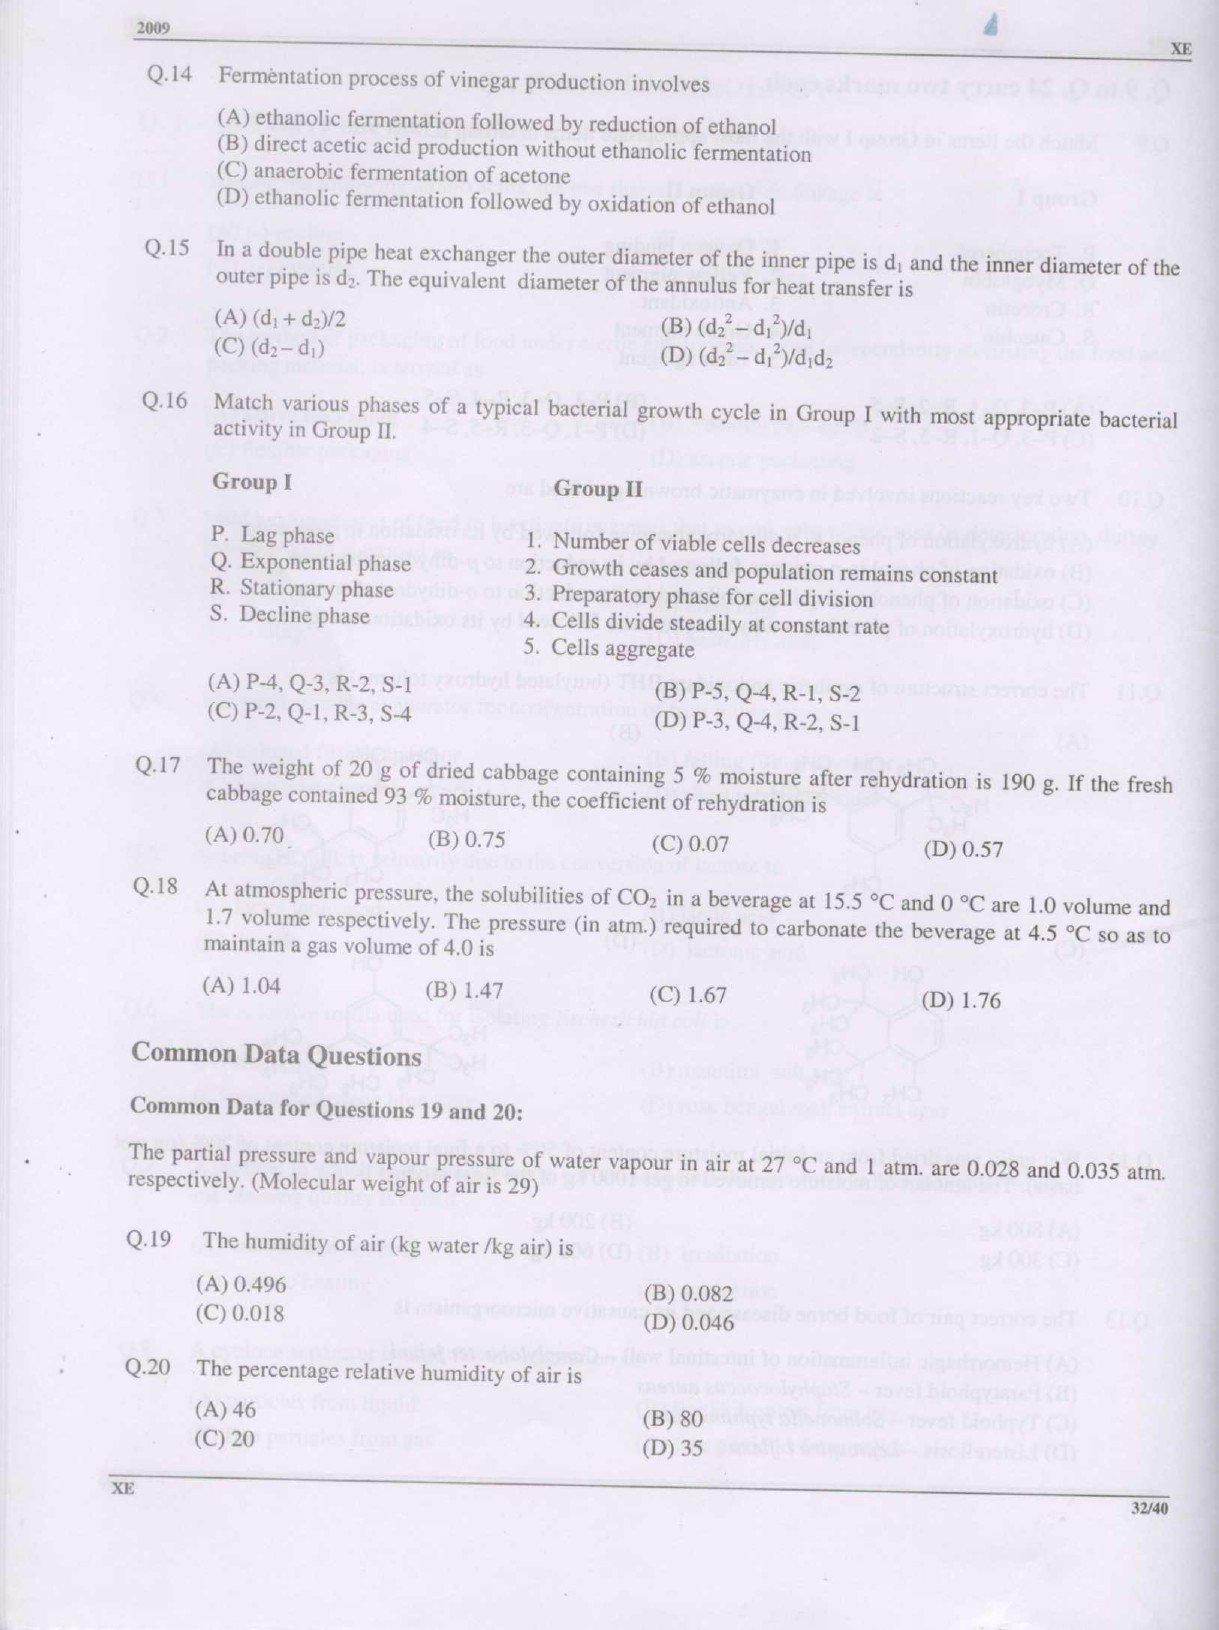 GATE Exam Question Paper 2009 Engineering Sciences 32